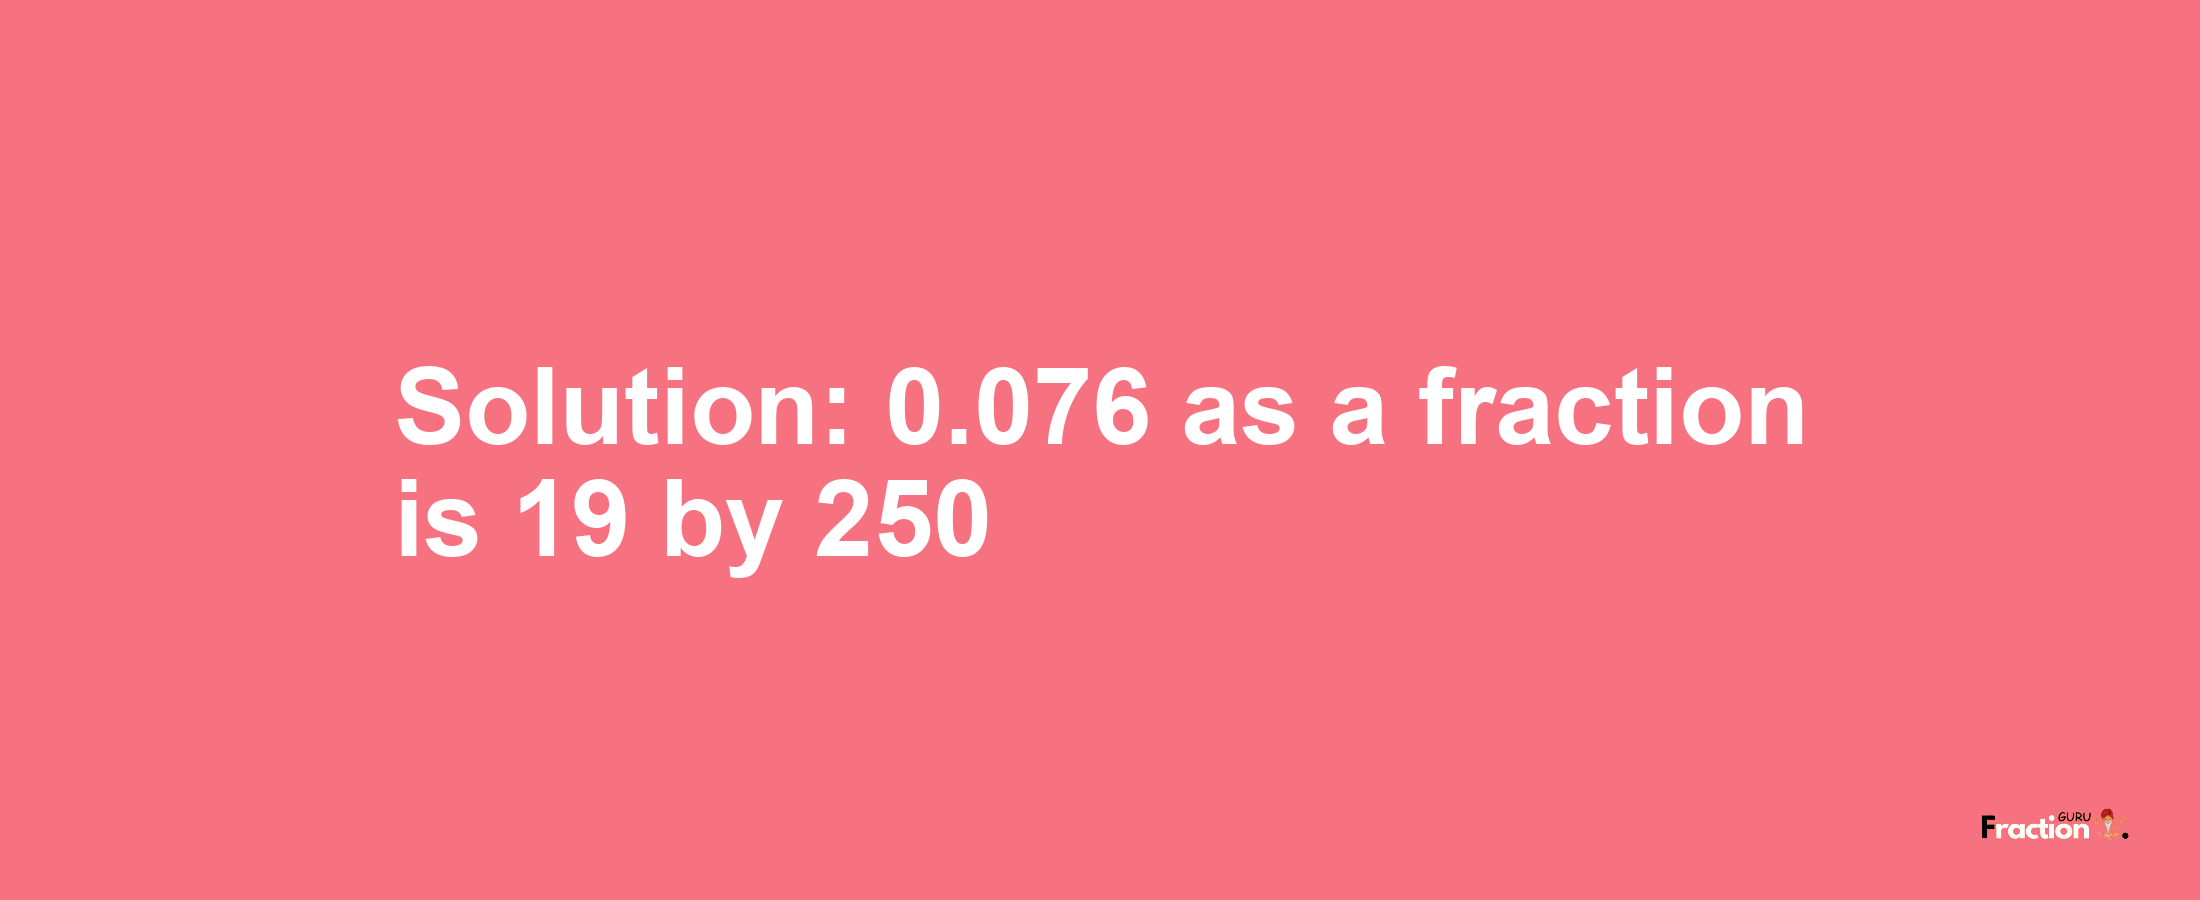 Solution:0.076 as a fraction is 19/250